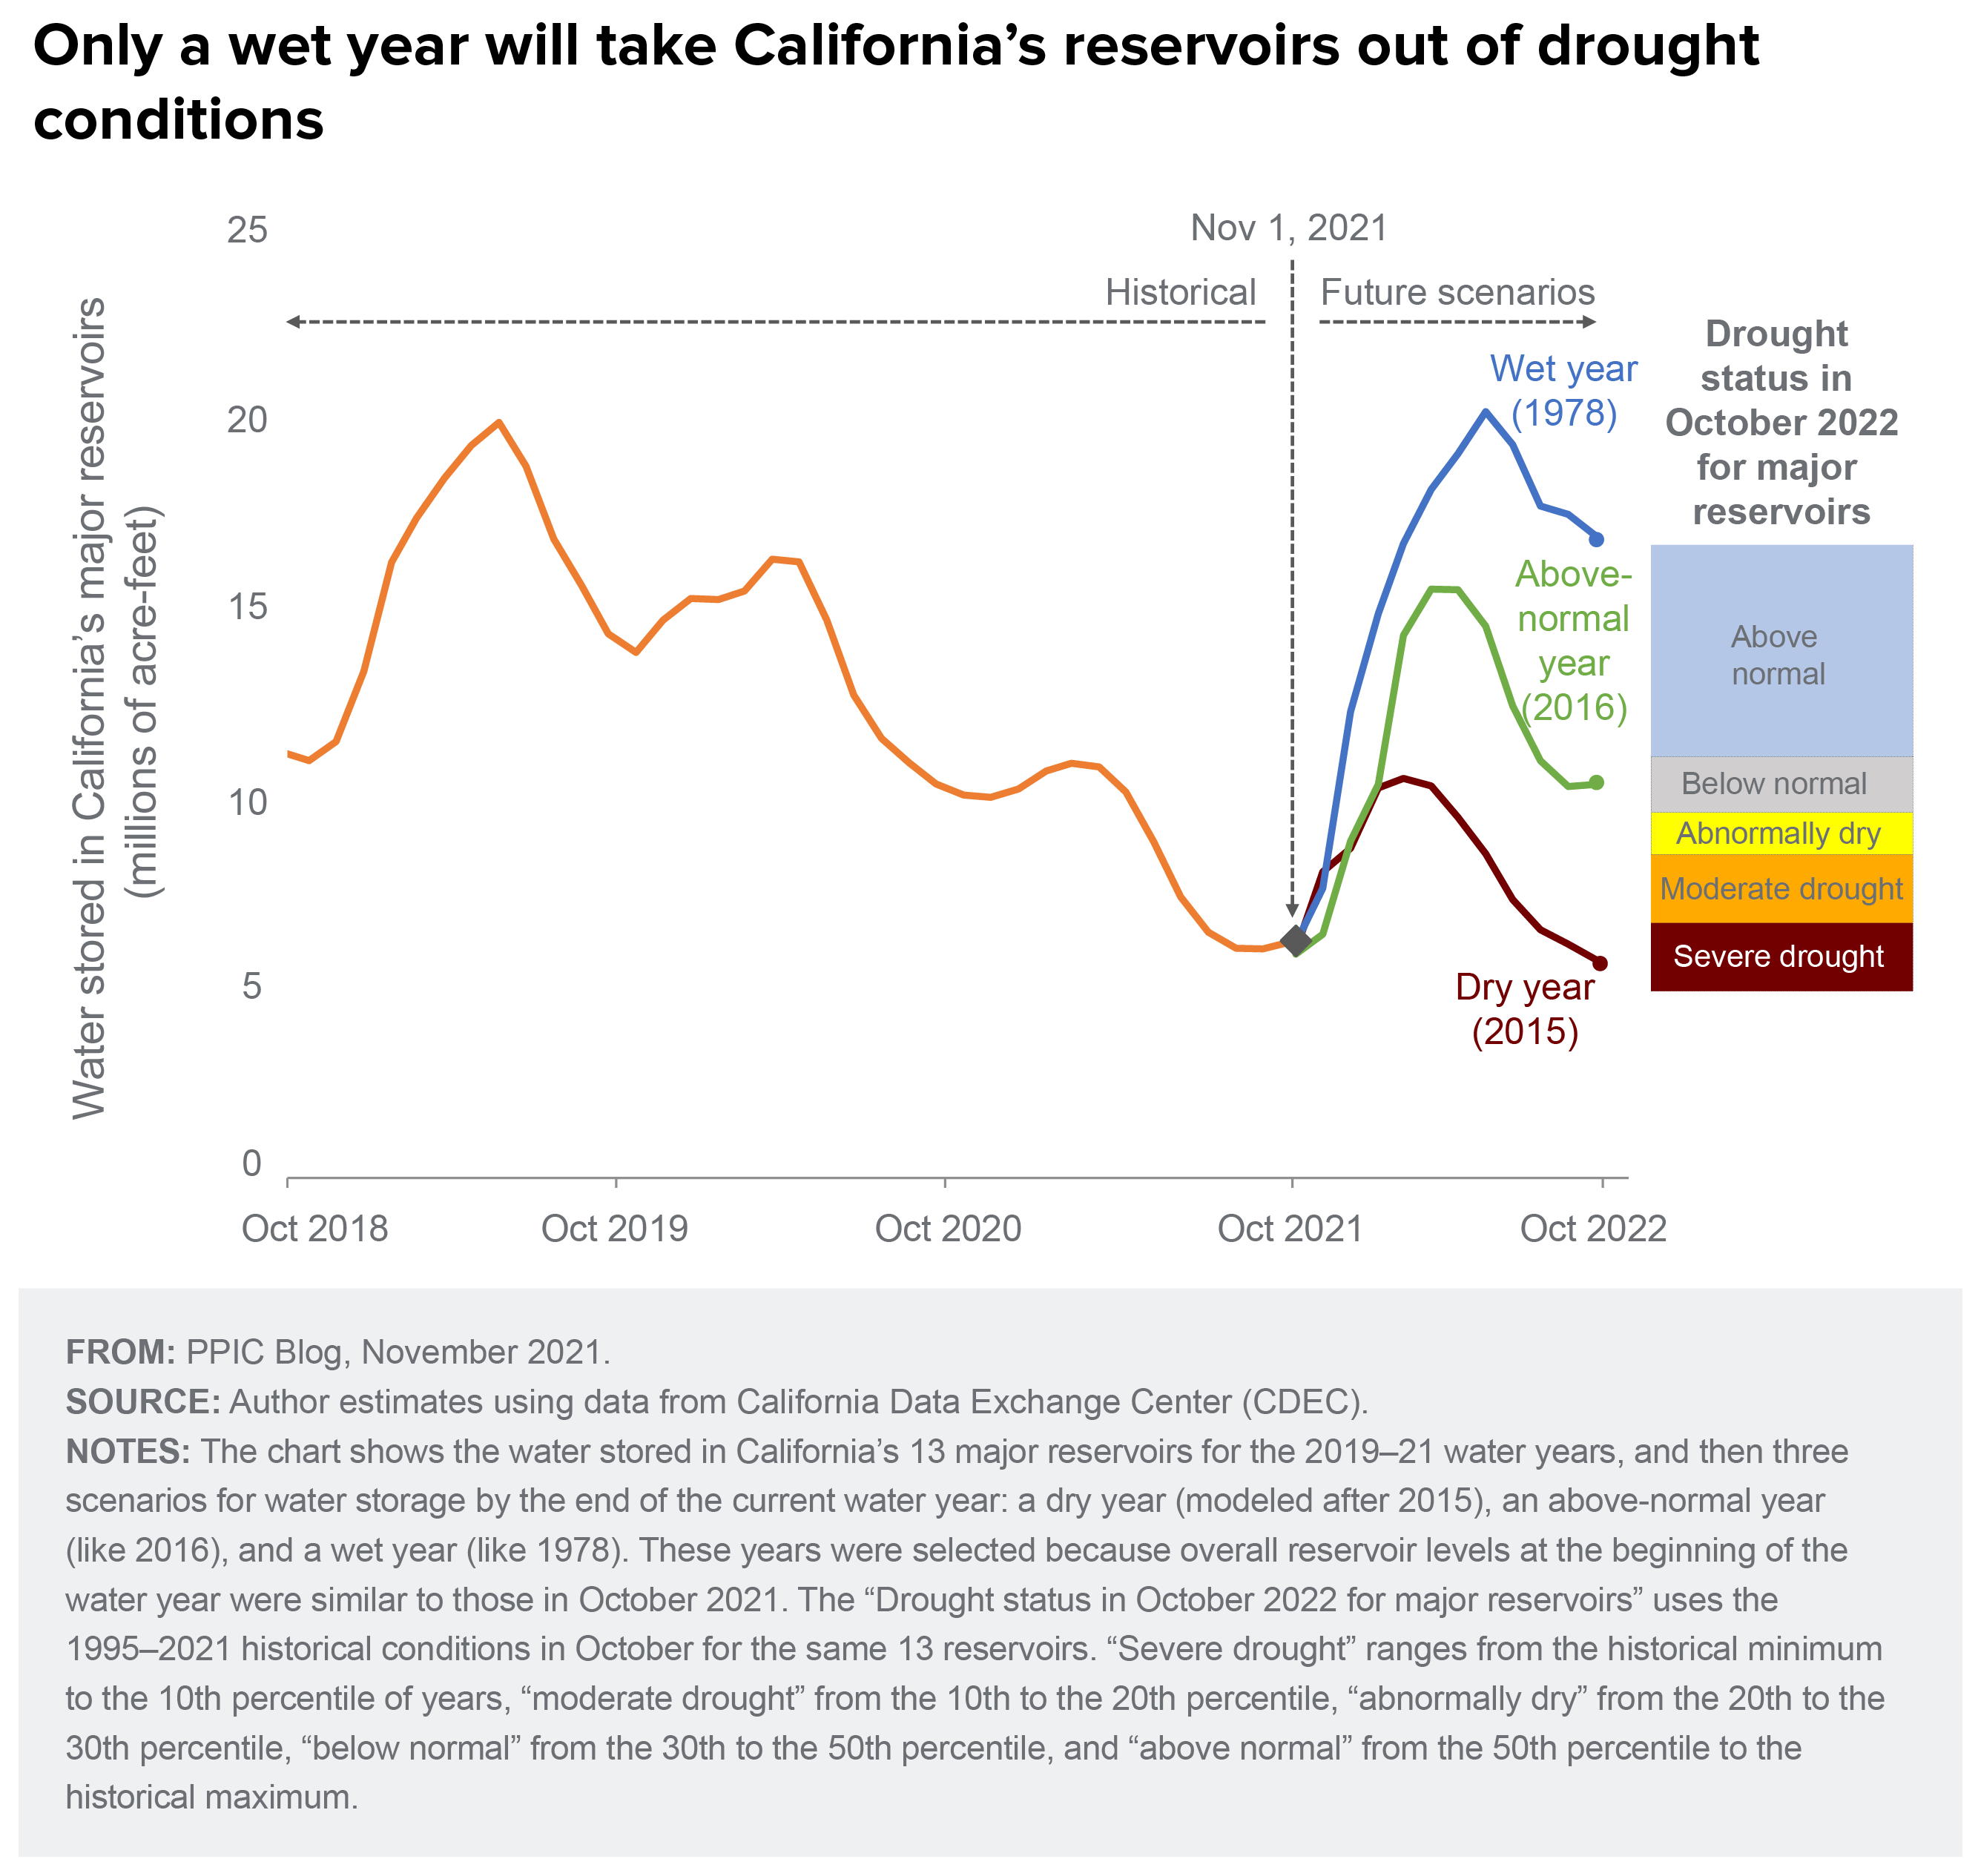 figure - Only a wet year will take California’s reservoirs out of drought conditions